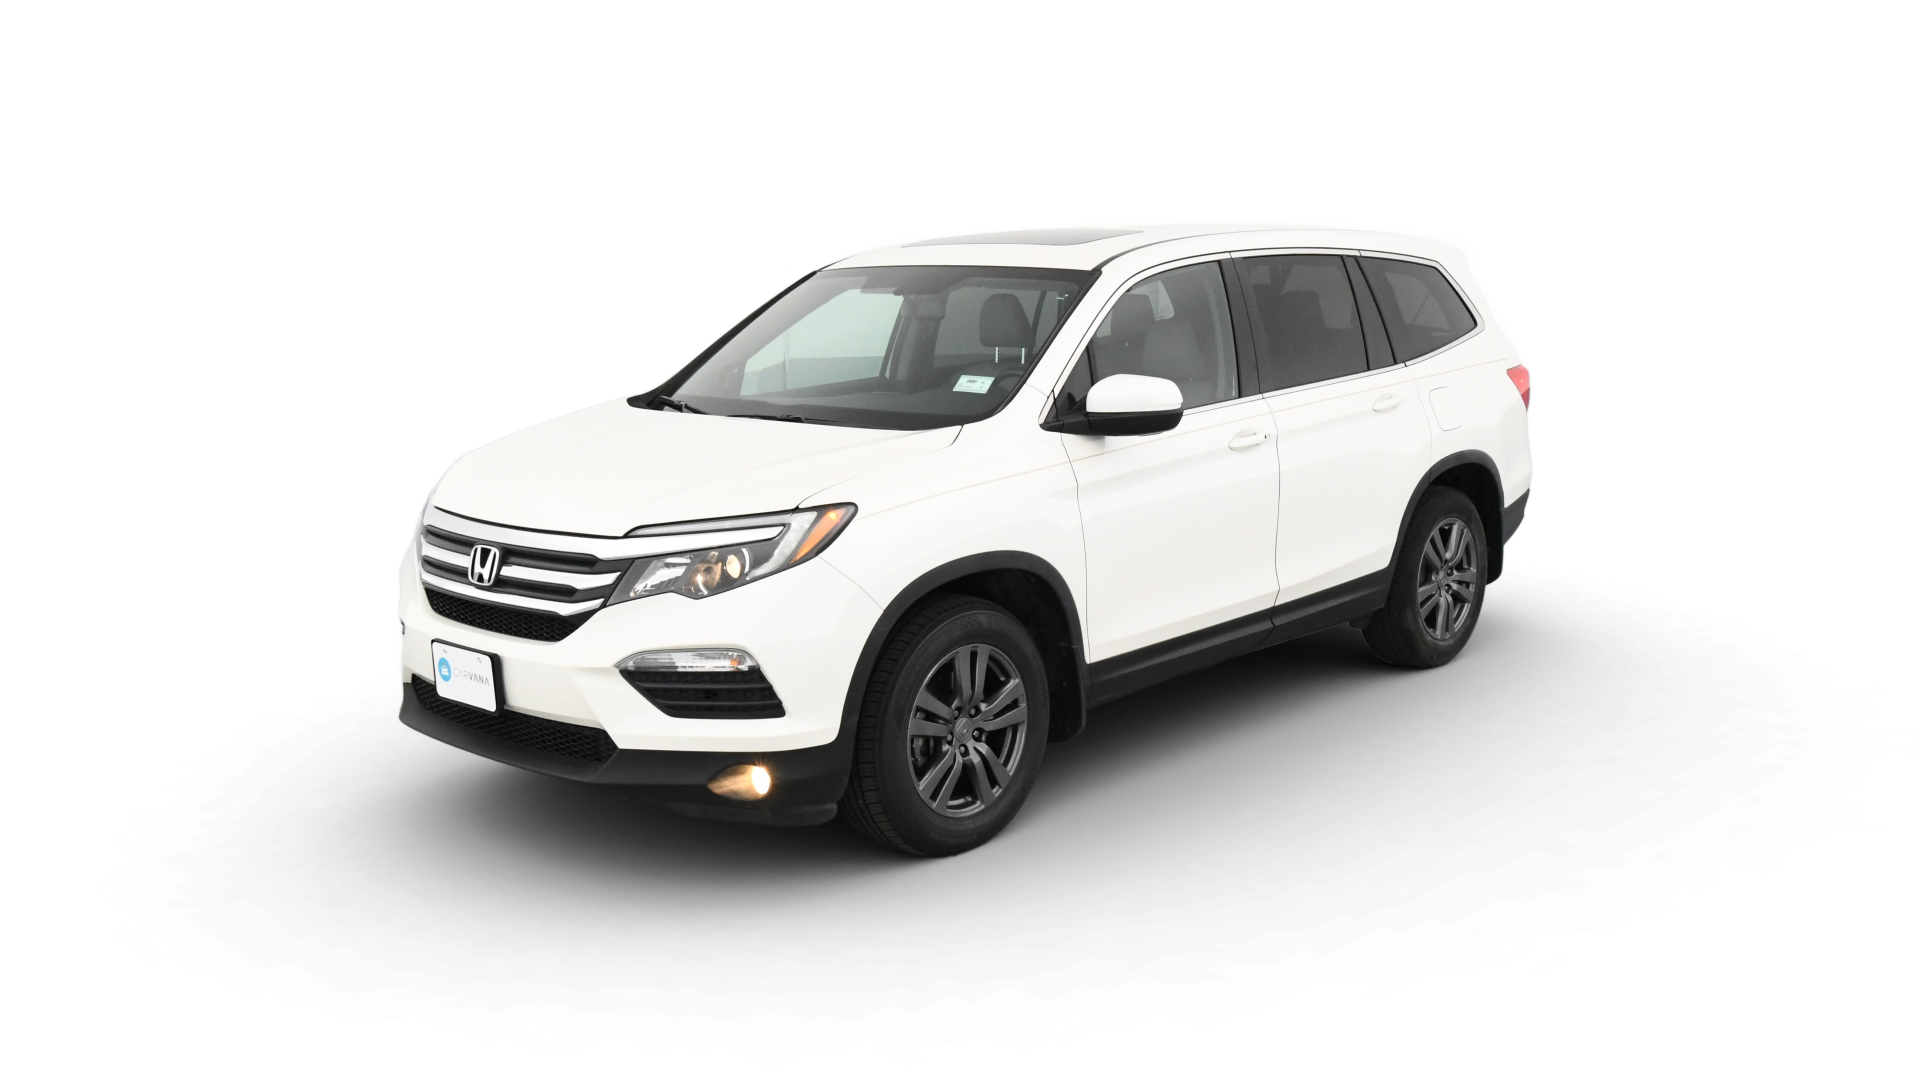 2018 Honda Pilot: Model overview, pricing, tech and specs - CNET